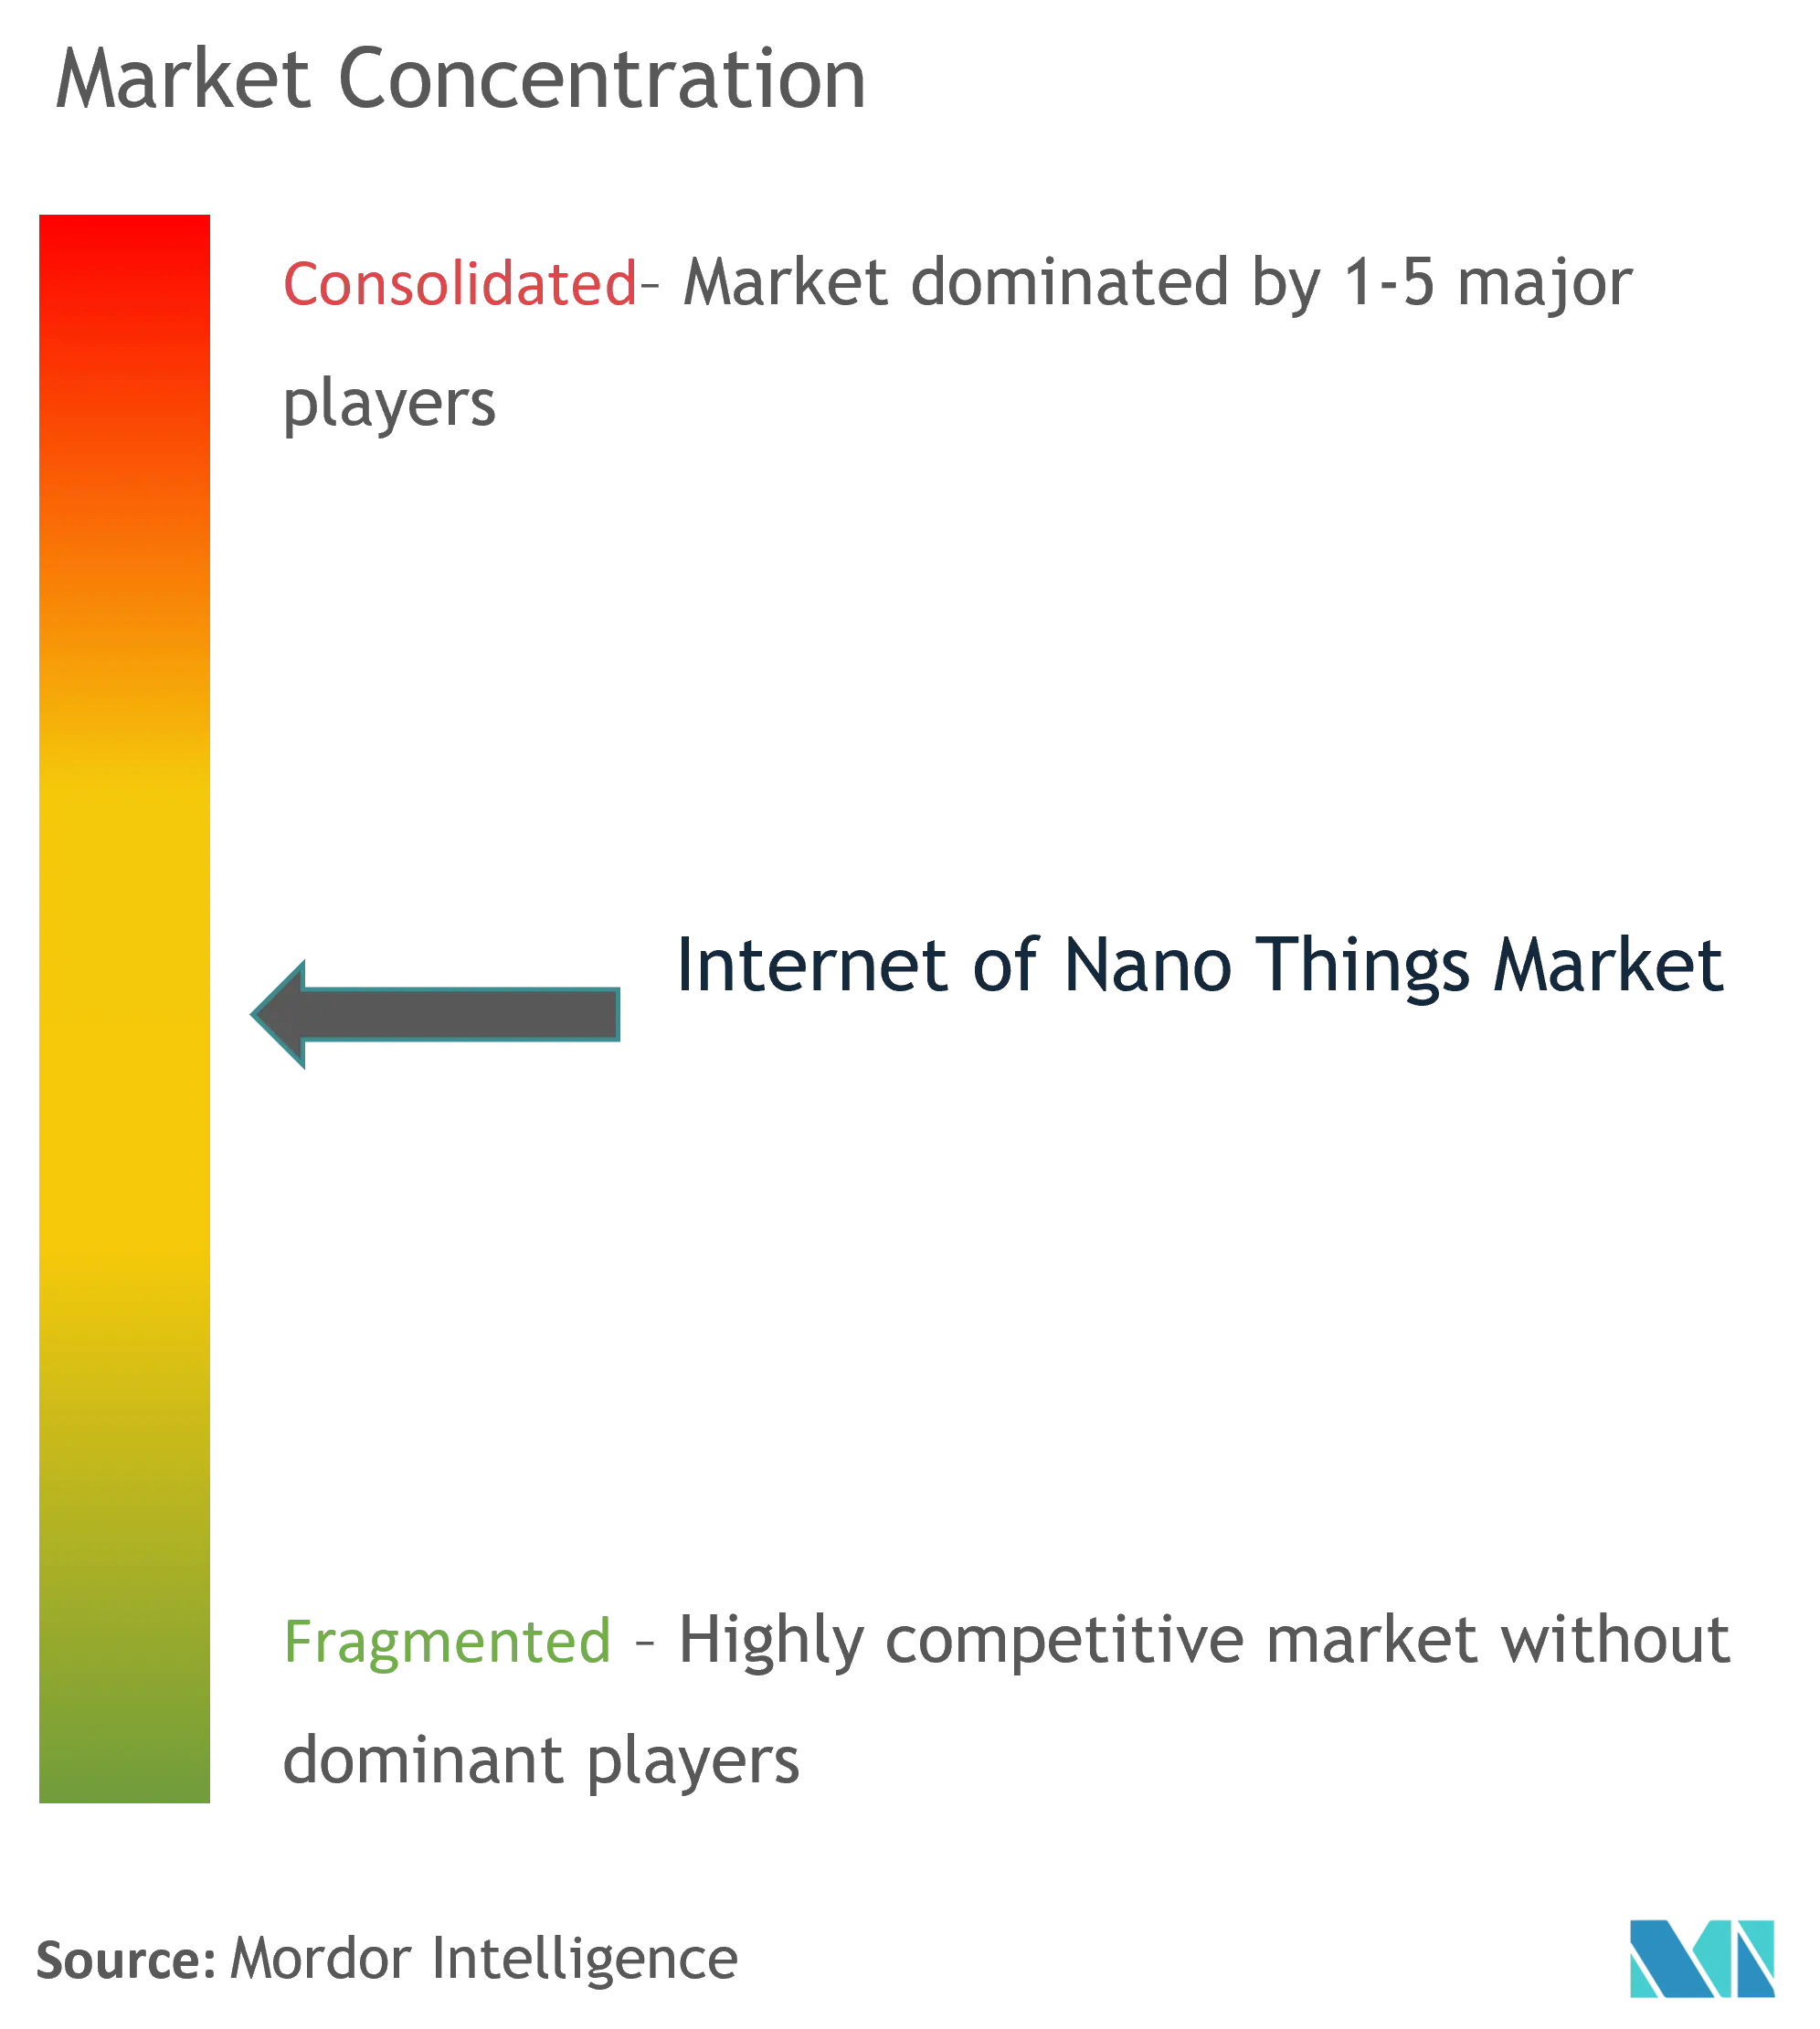 Internet of Nano Things Market - Market Concentration.png